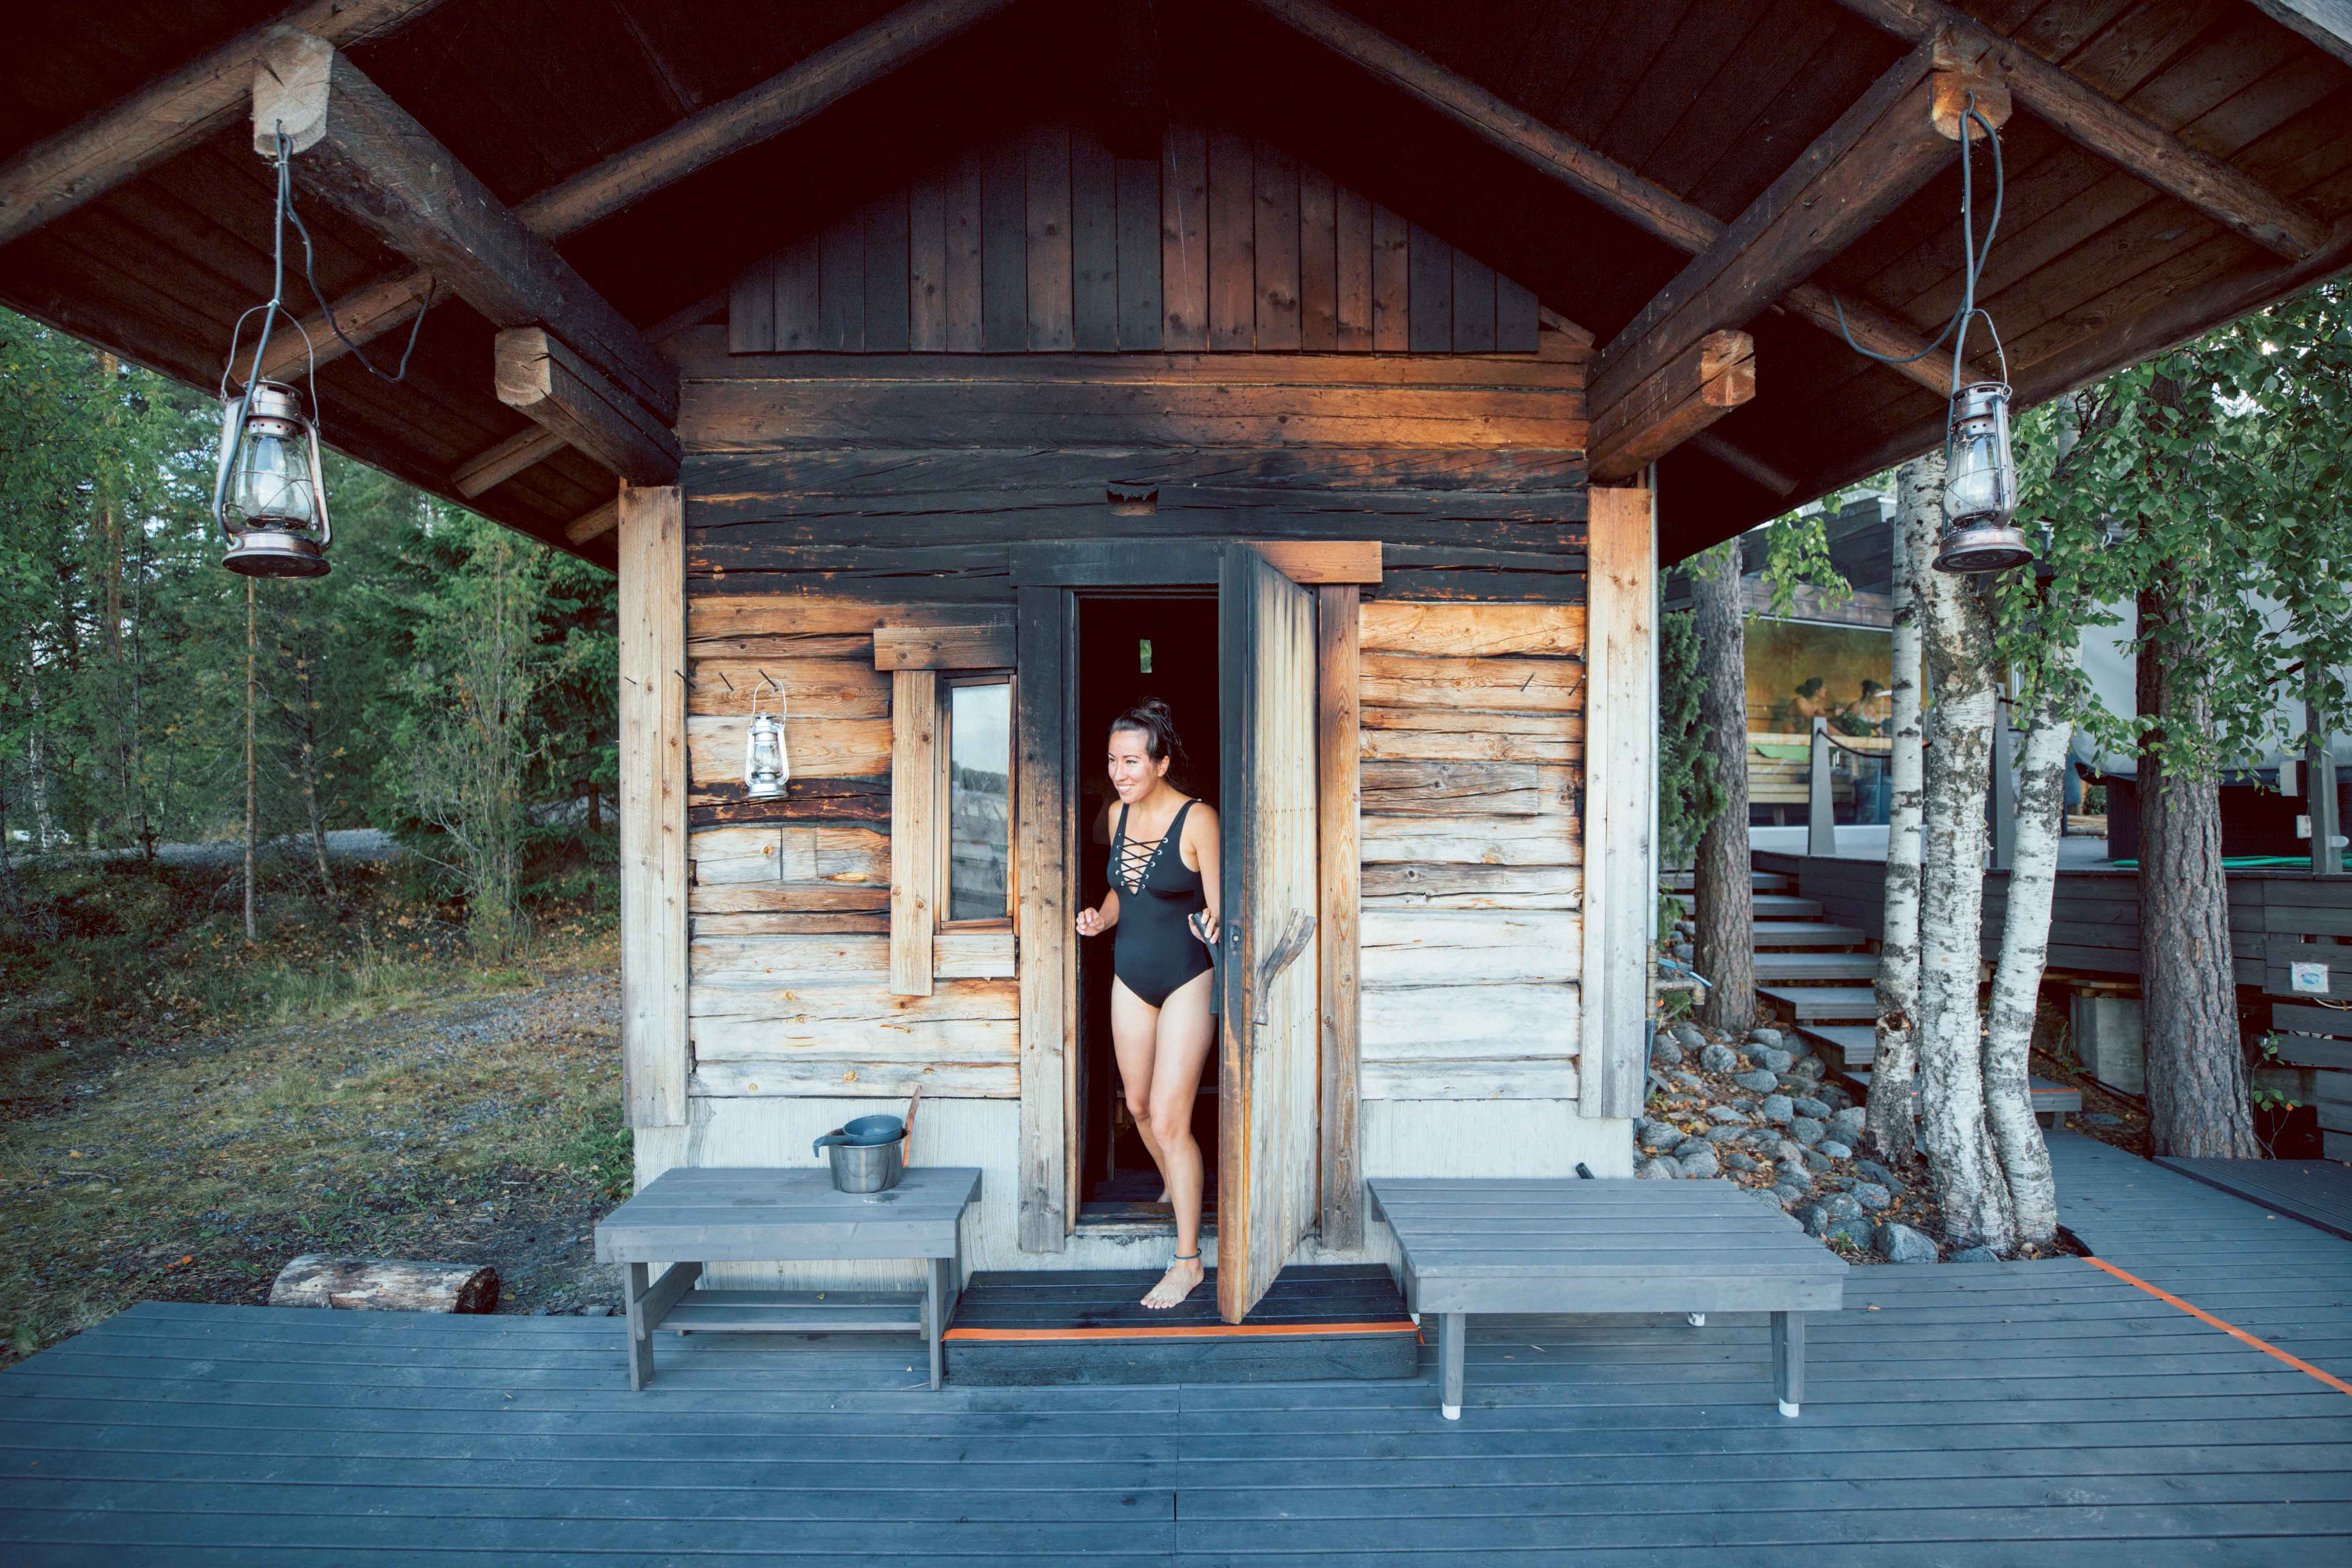 A smiling woman stepping out of a smoke sauna